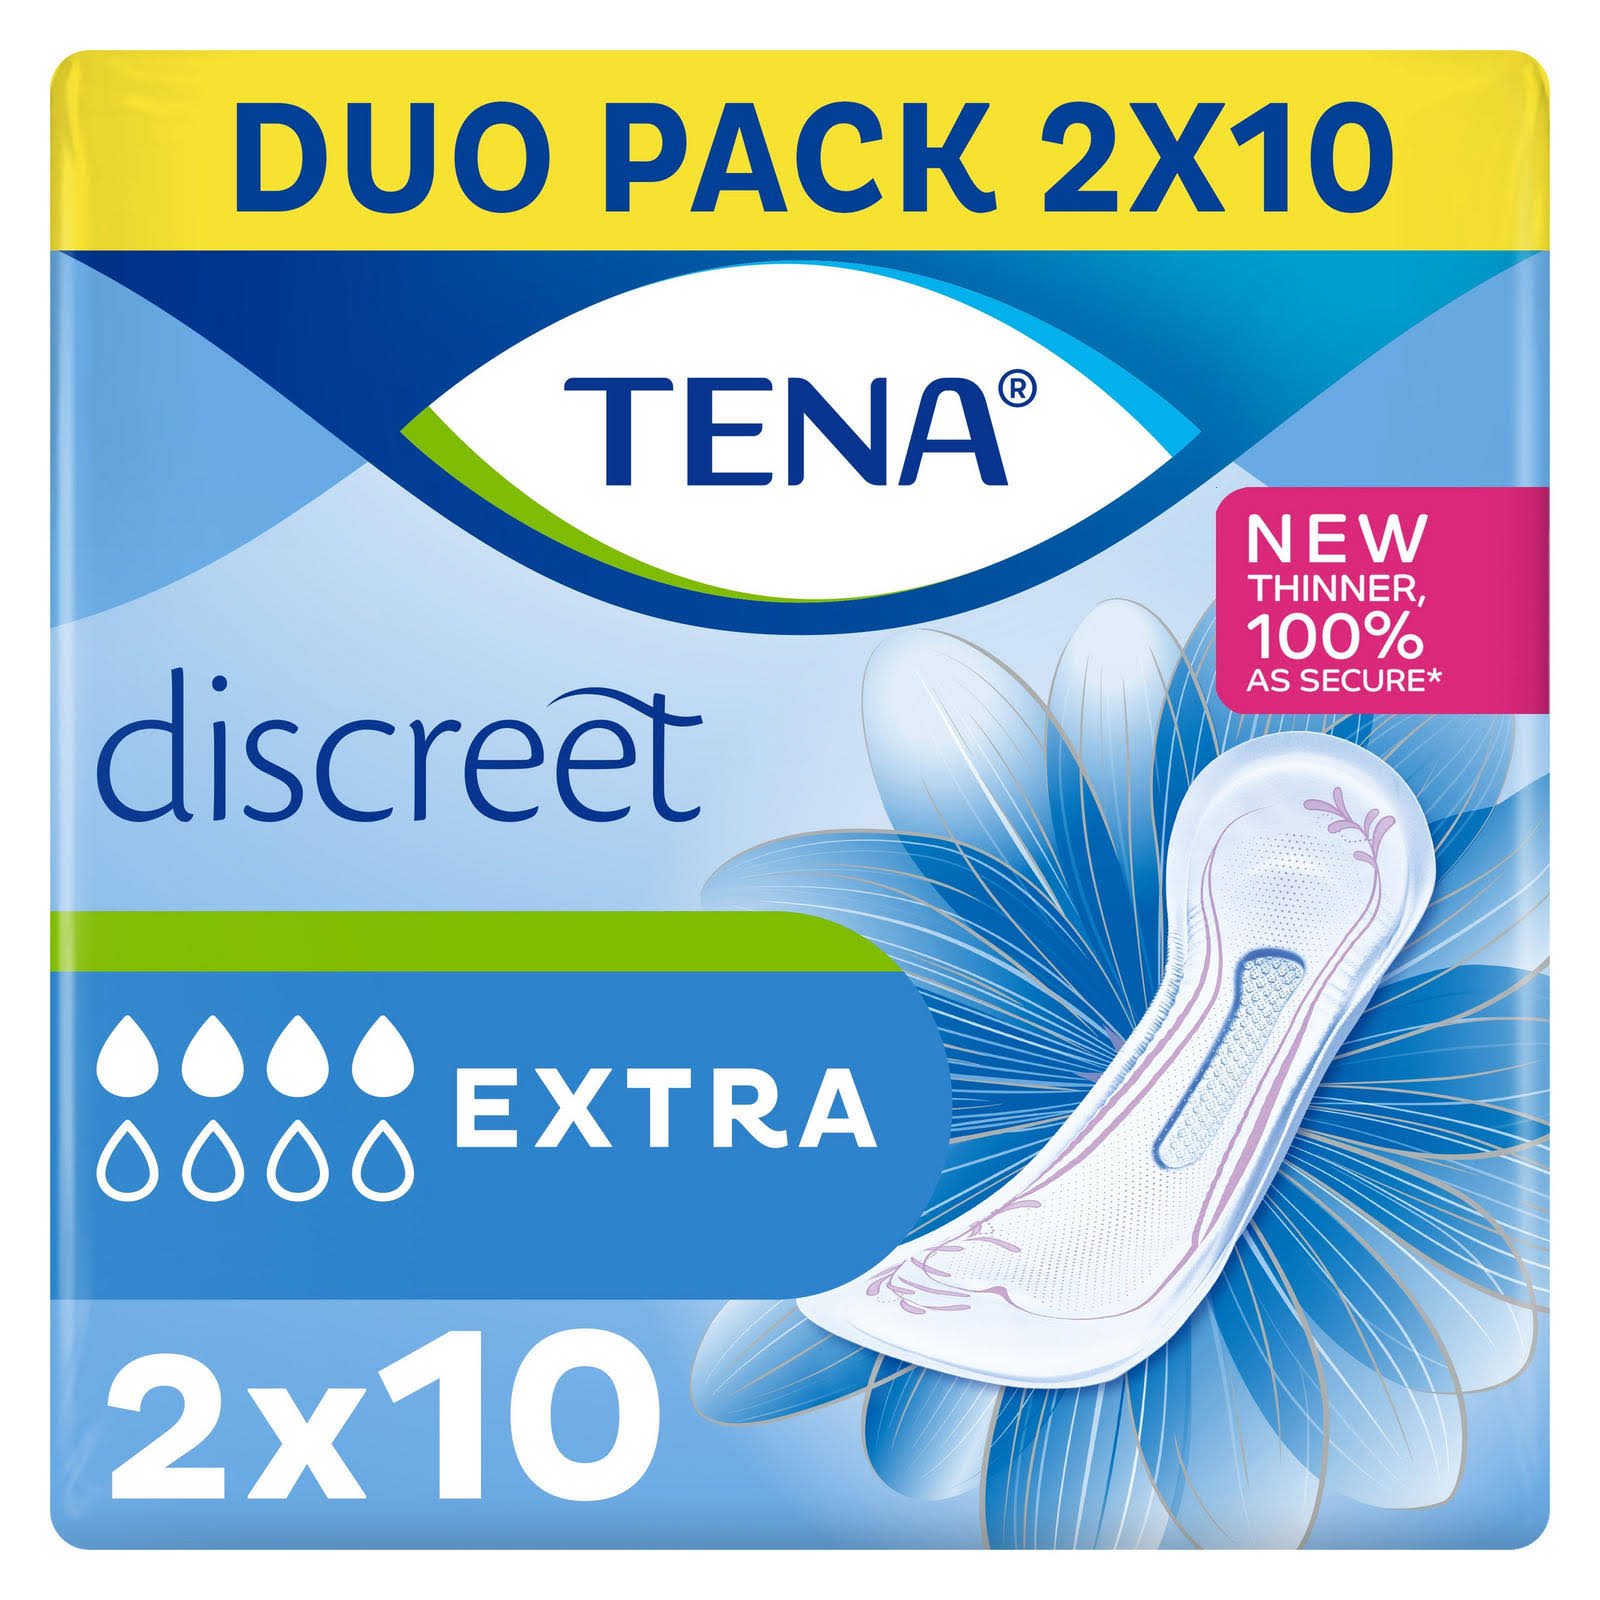 TENA Lady Discreet Extra Incontinence Pads 20 Pack